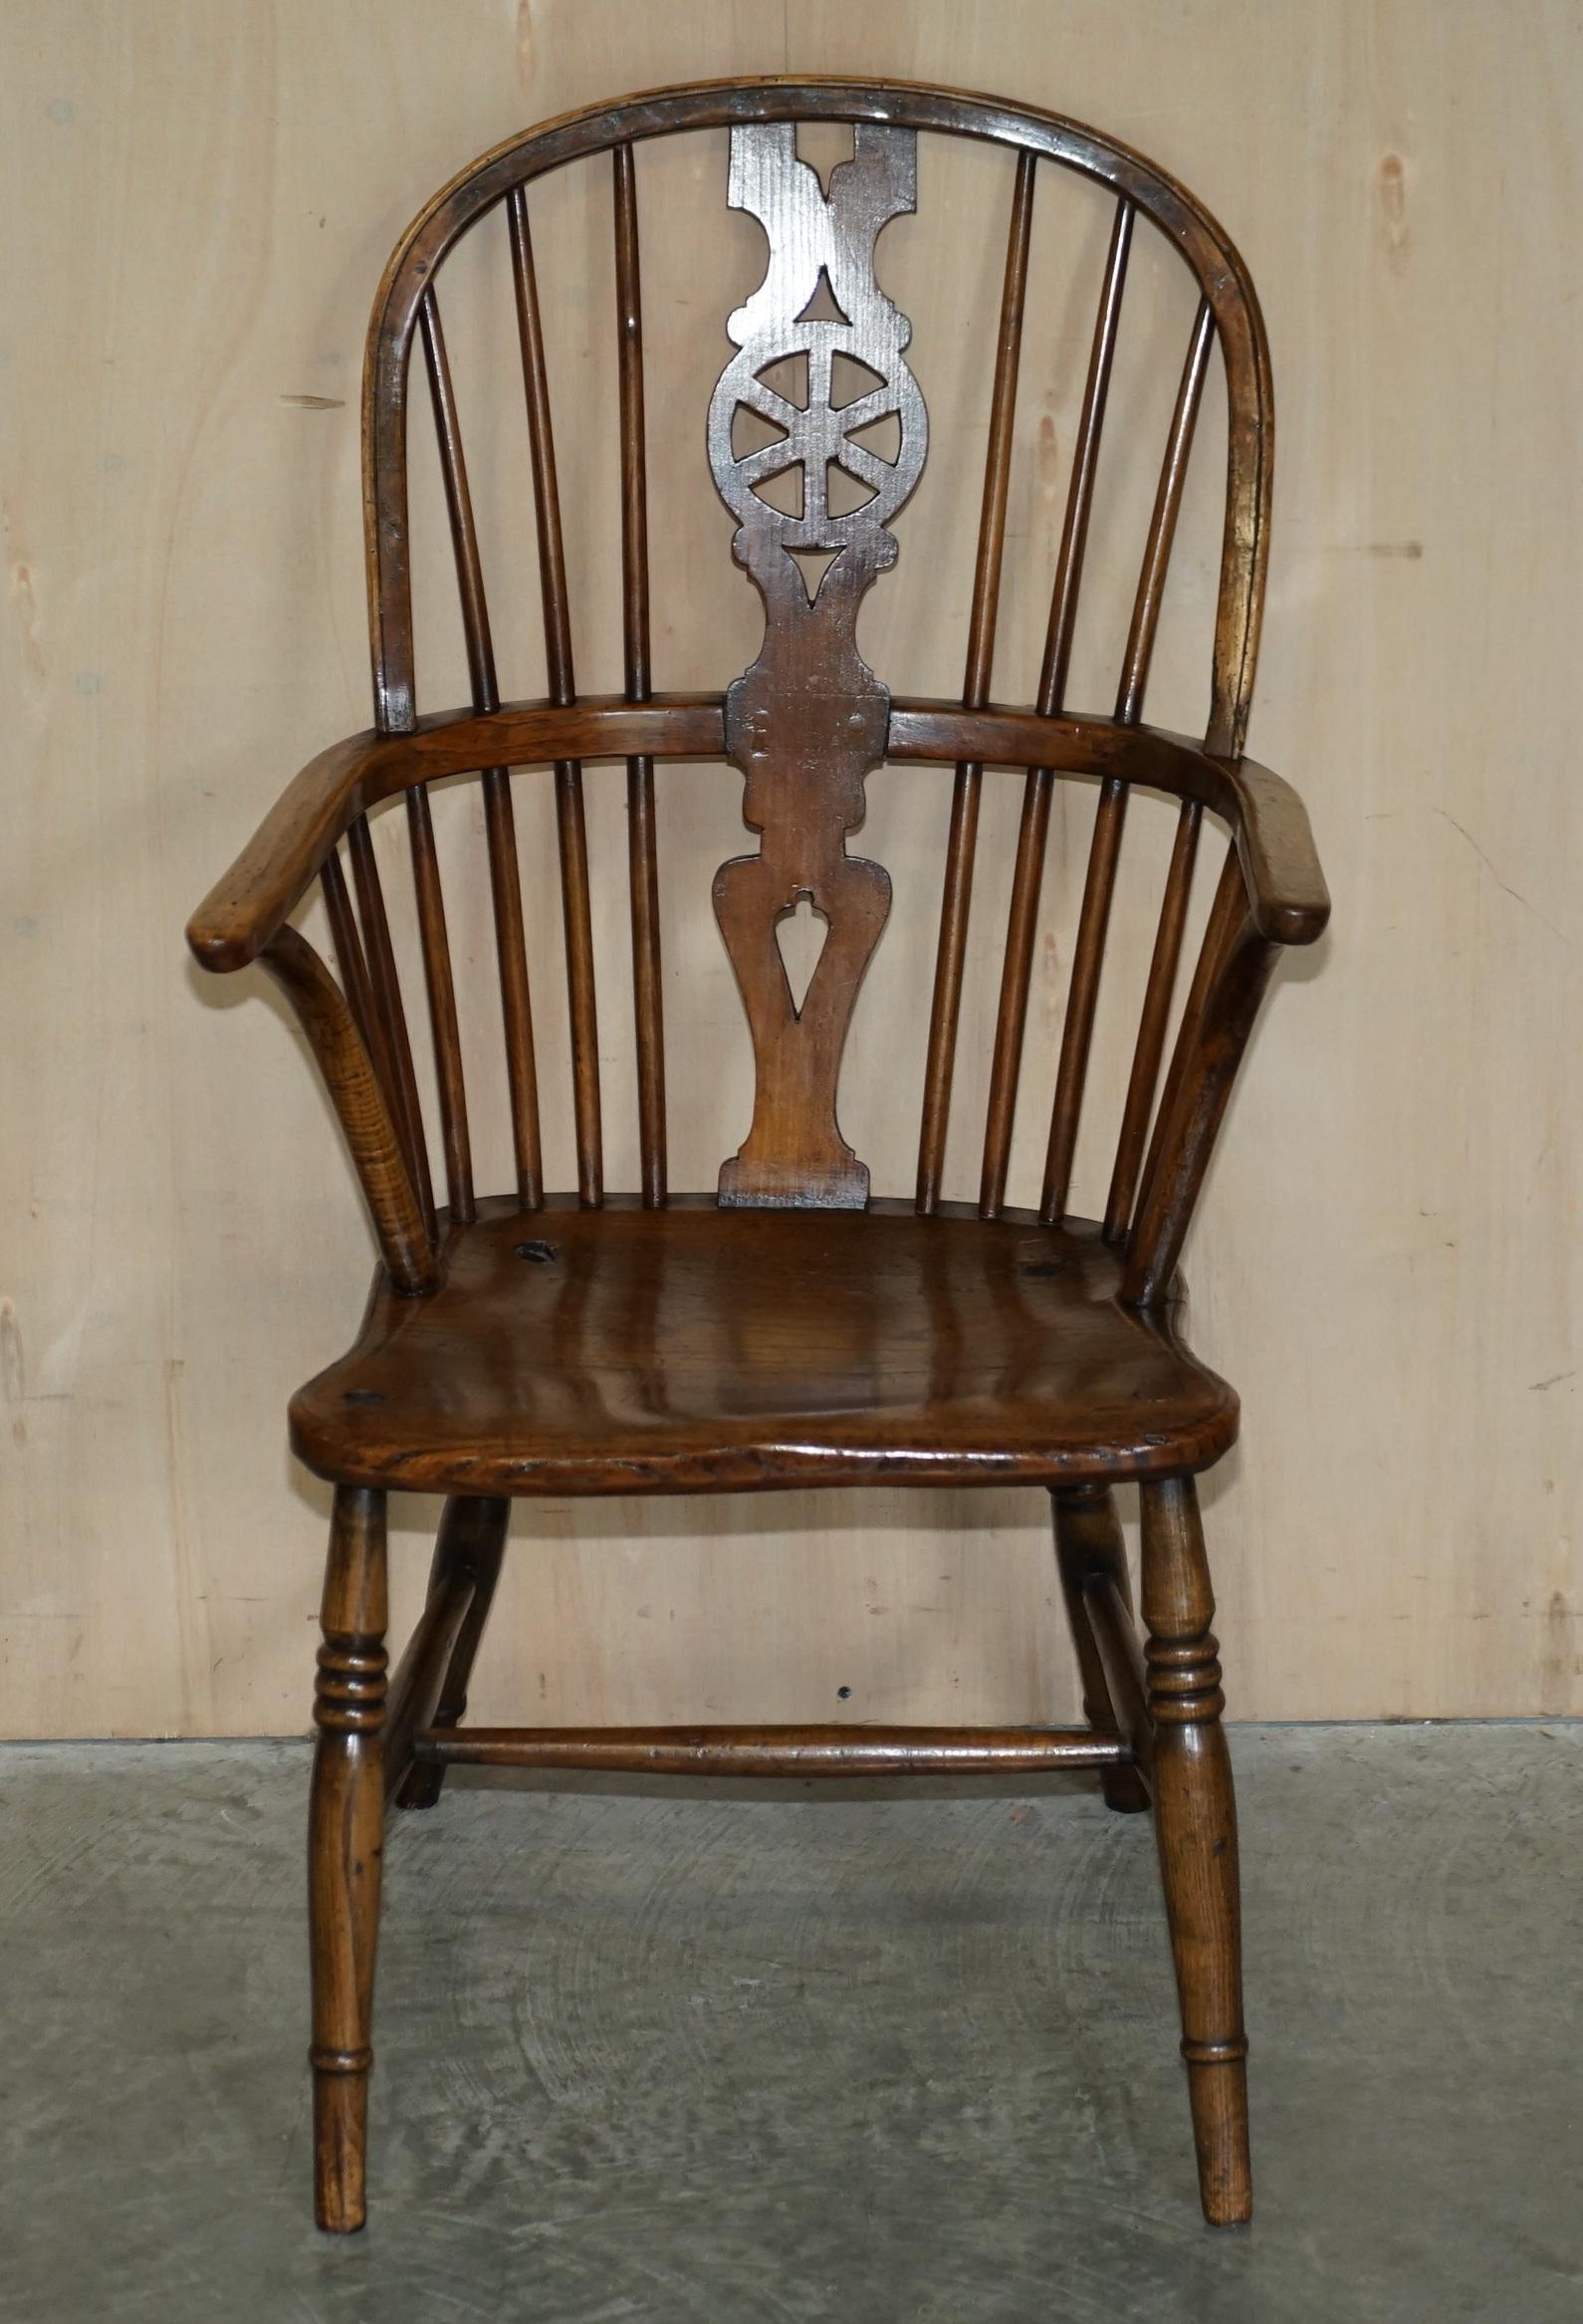 We are delighted to offer for sale this stunning early 19th century English classic antique Elm hoop back west country Windsor armchair

A highly coveted, well made and decorative armchair, in the traditional Elm, this is an early hoop back